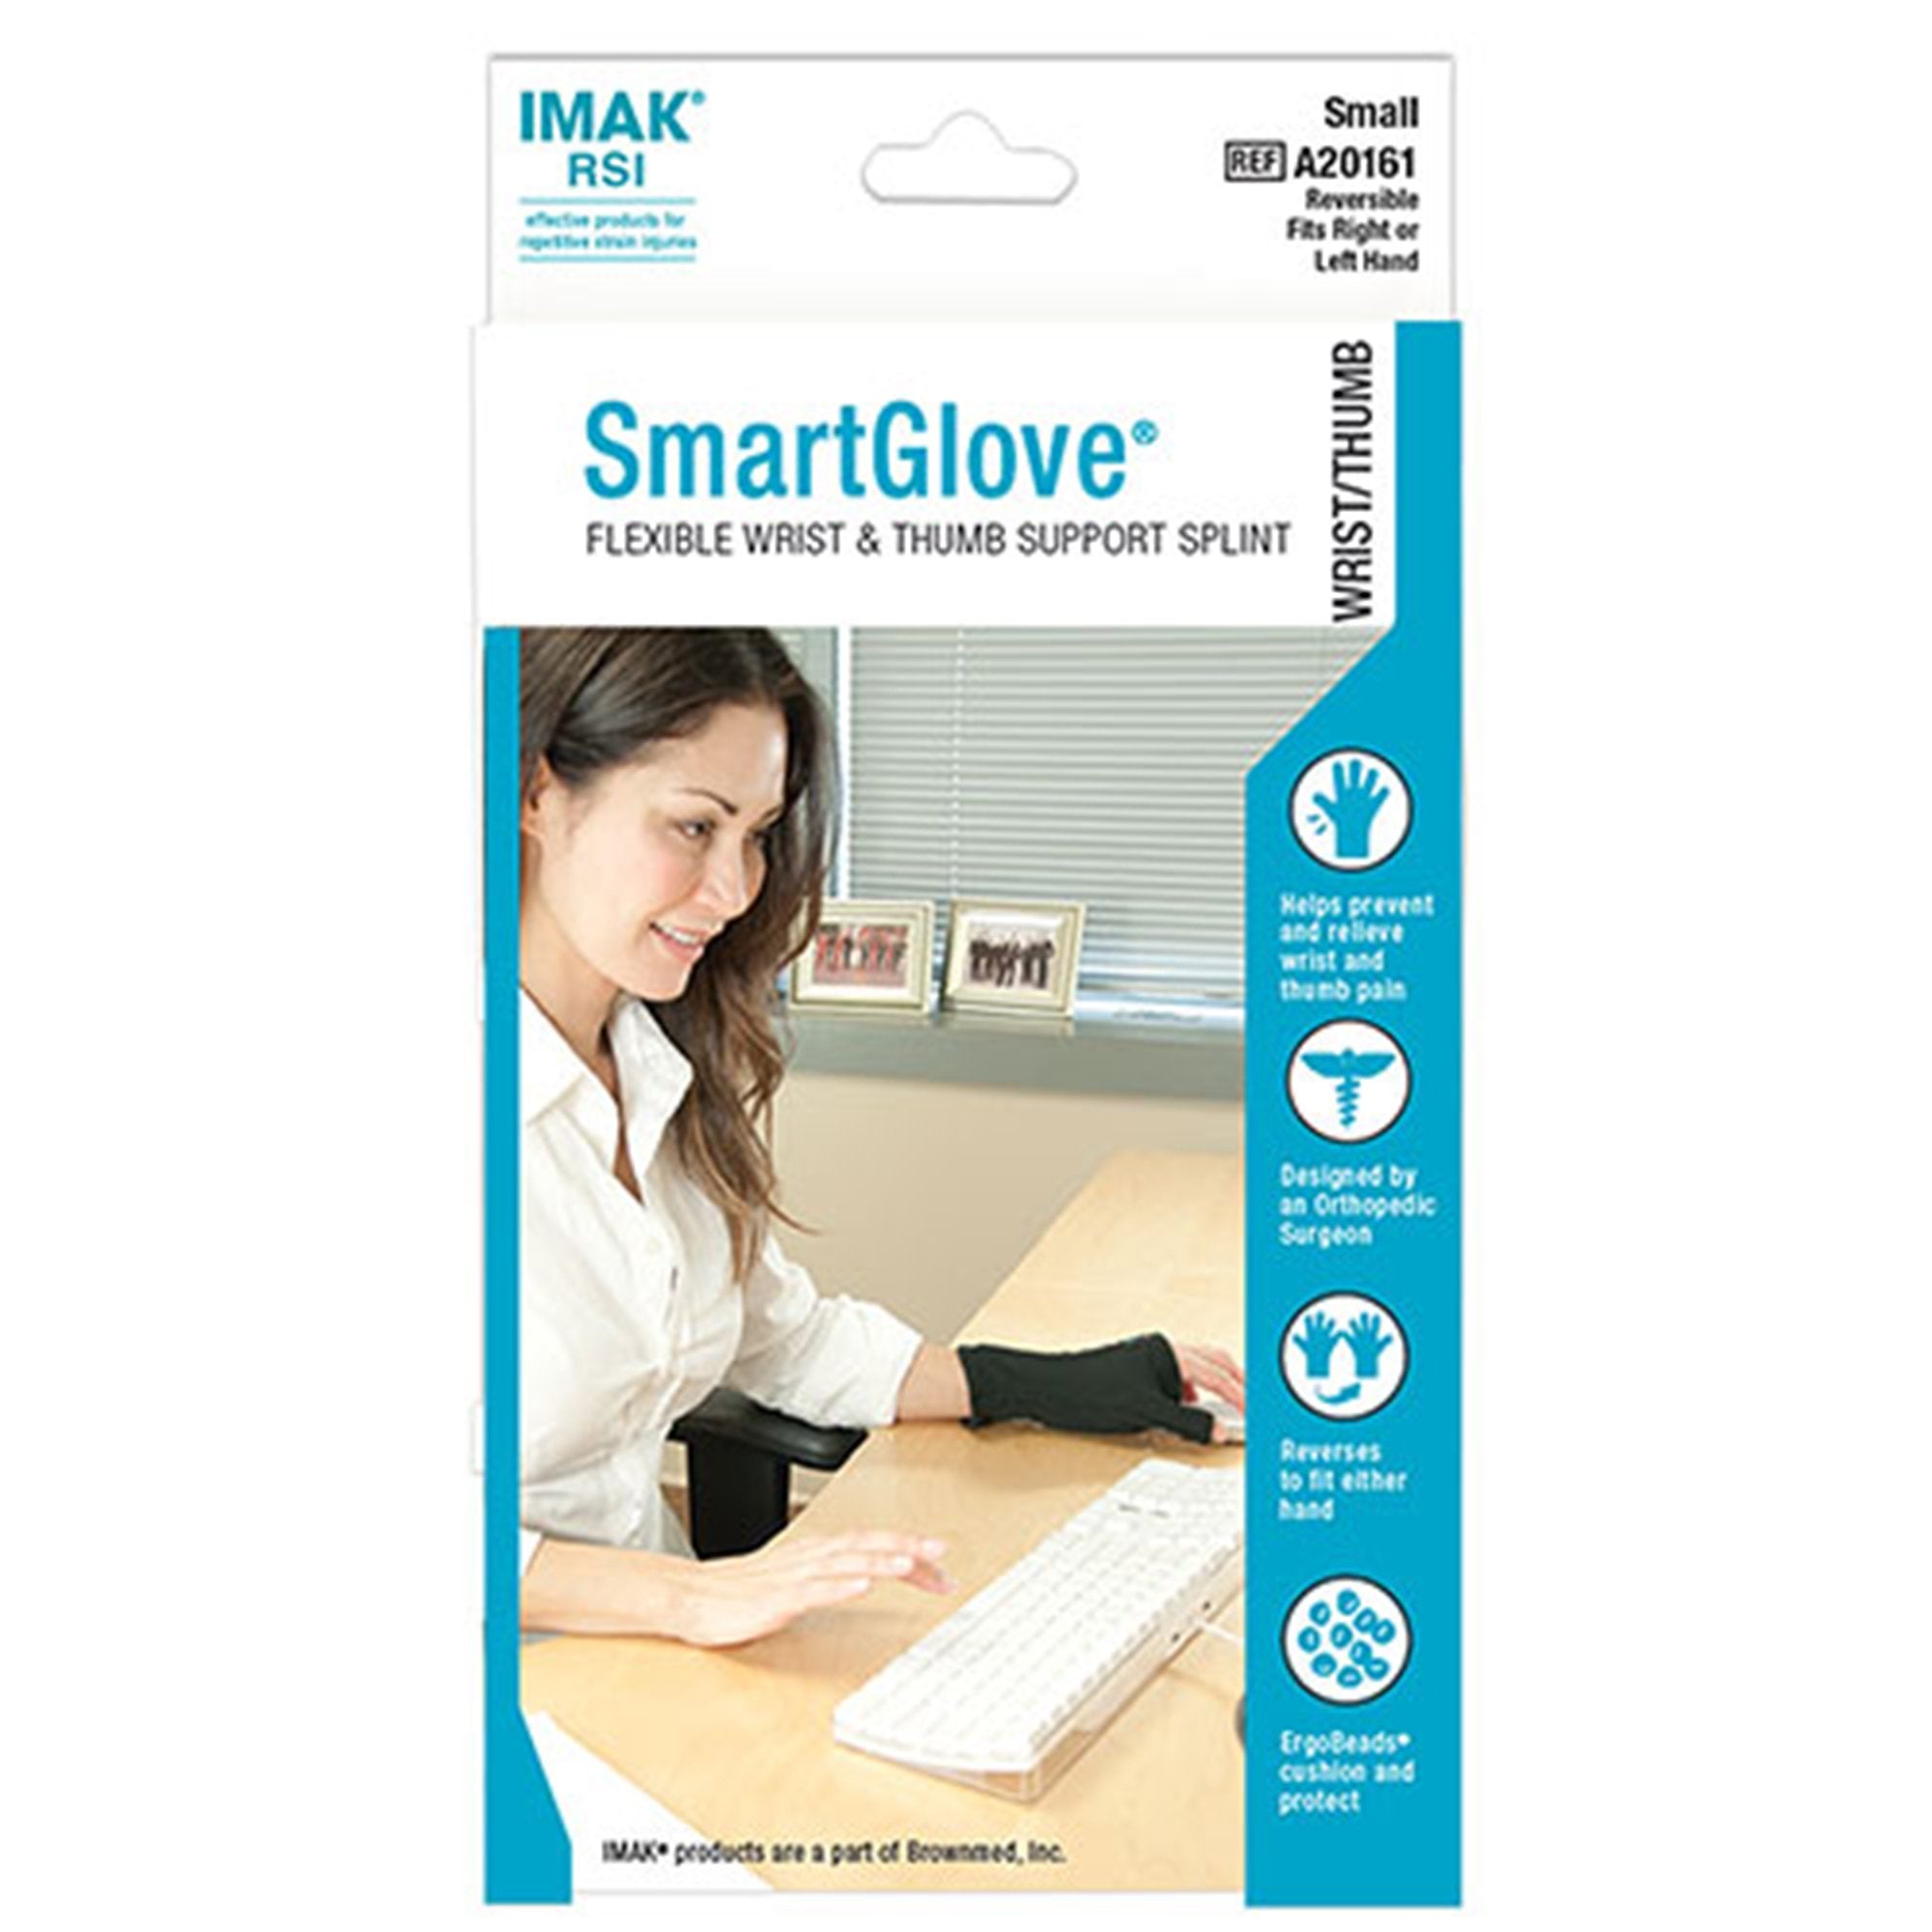 Support Gloves with Thumb Extension IMAK® RSI SmartGlove Fingerless Small Over-the-Wrist Length Ambidextrous Cotton / Lycra®